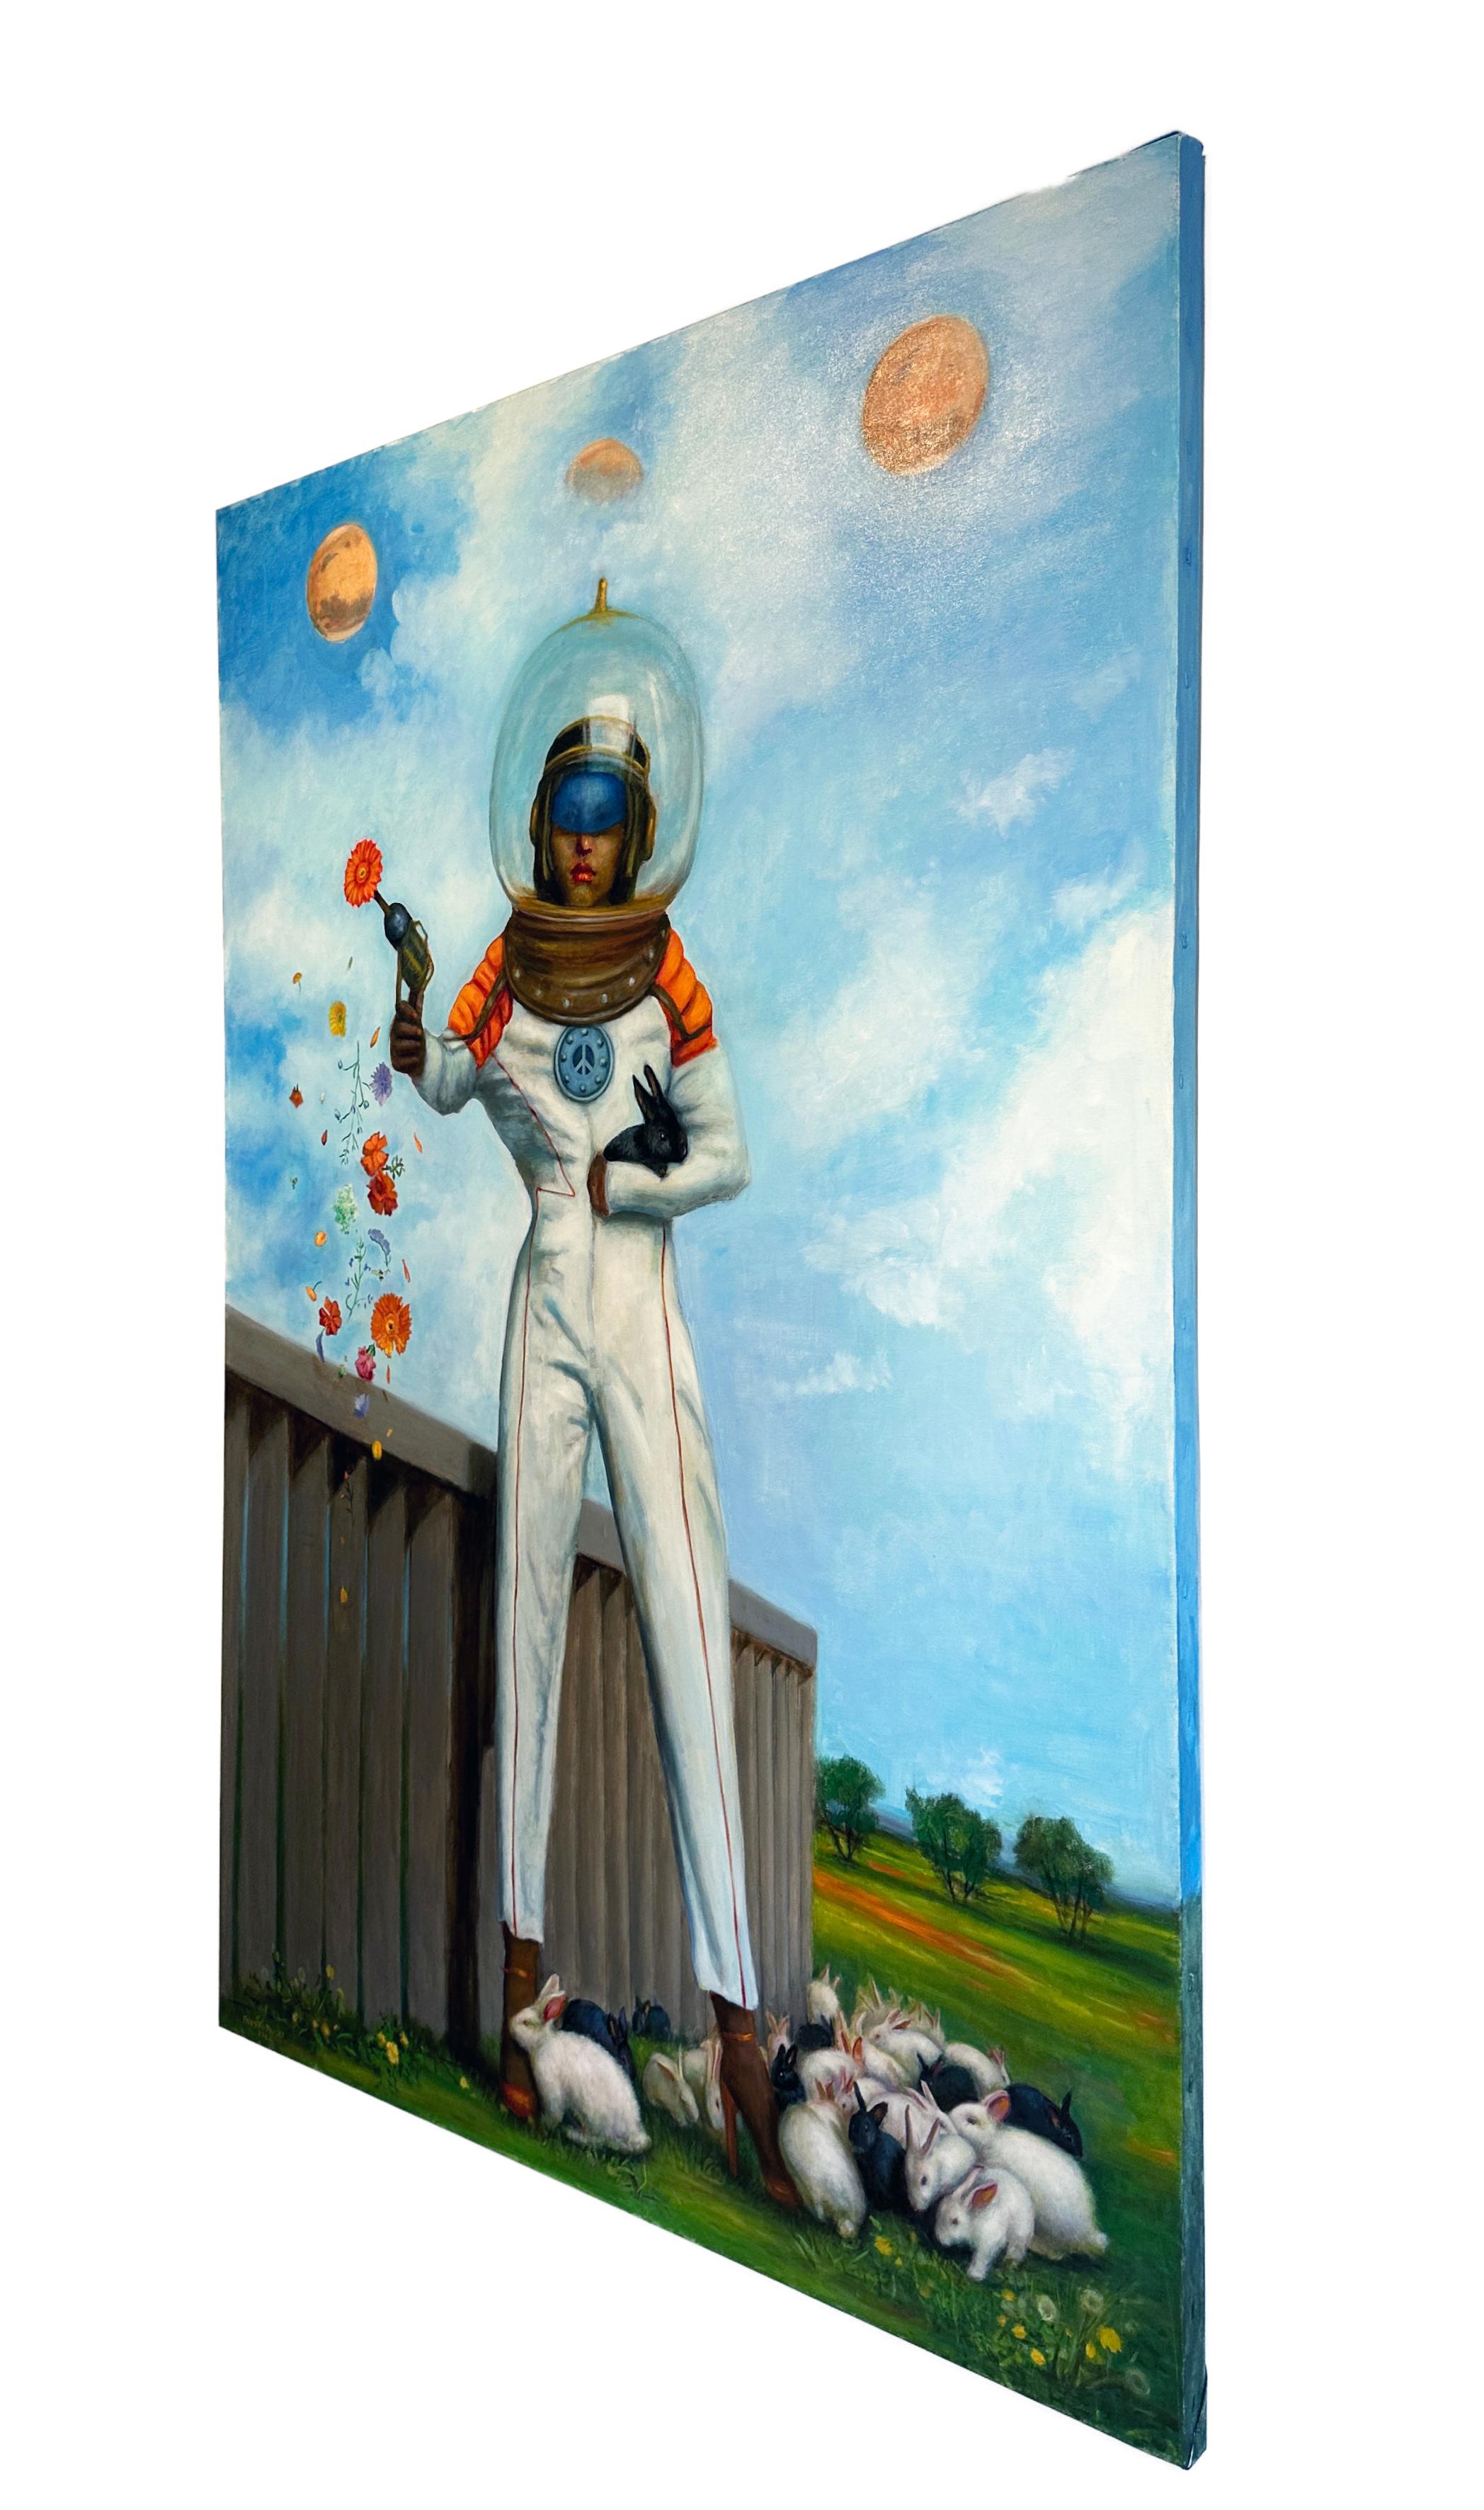 Peace Cadet - Large Scale Portrait of Woman in Space Suit Surrounded by Bunnies - Painting by Rose Freymuth-Frazier